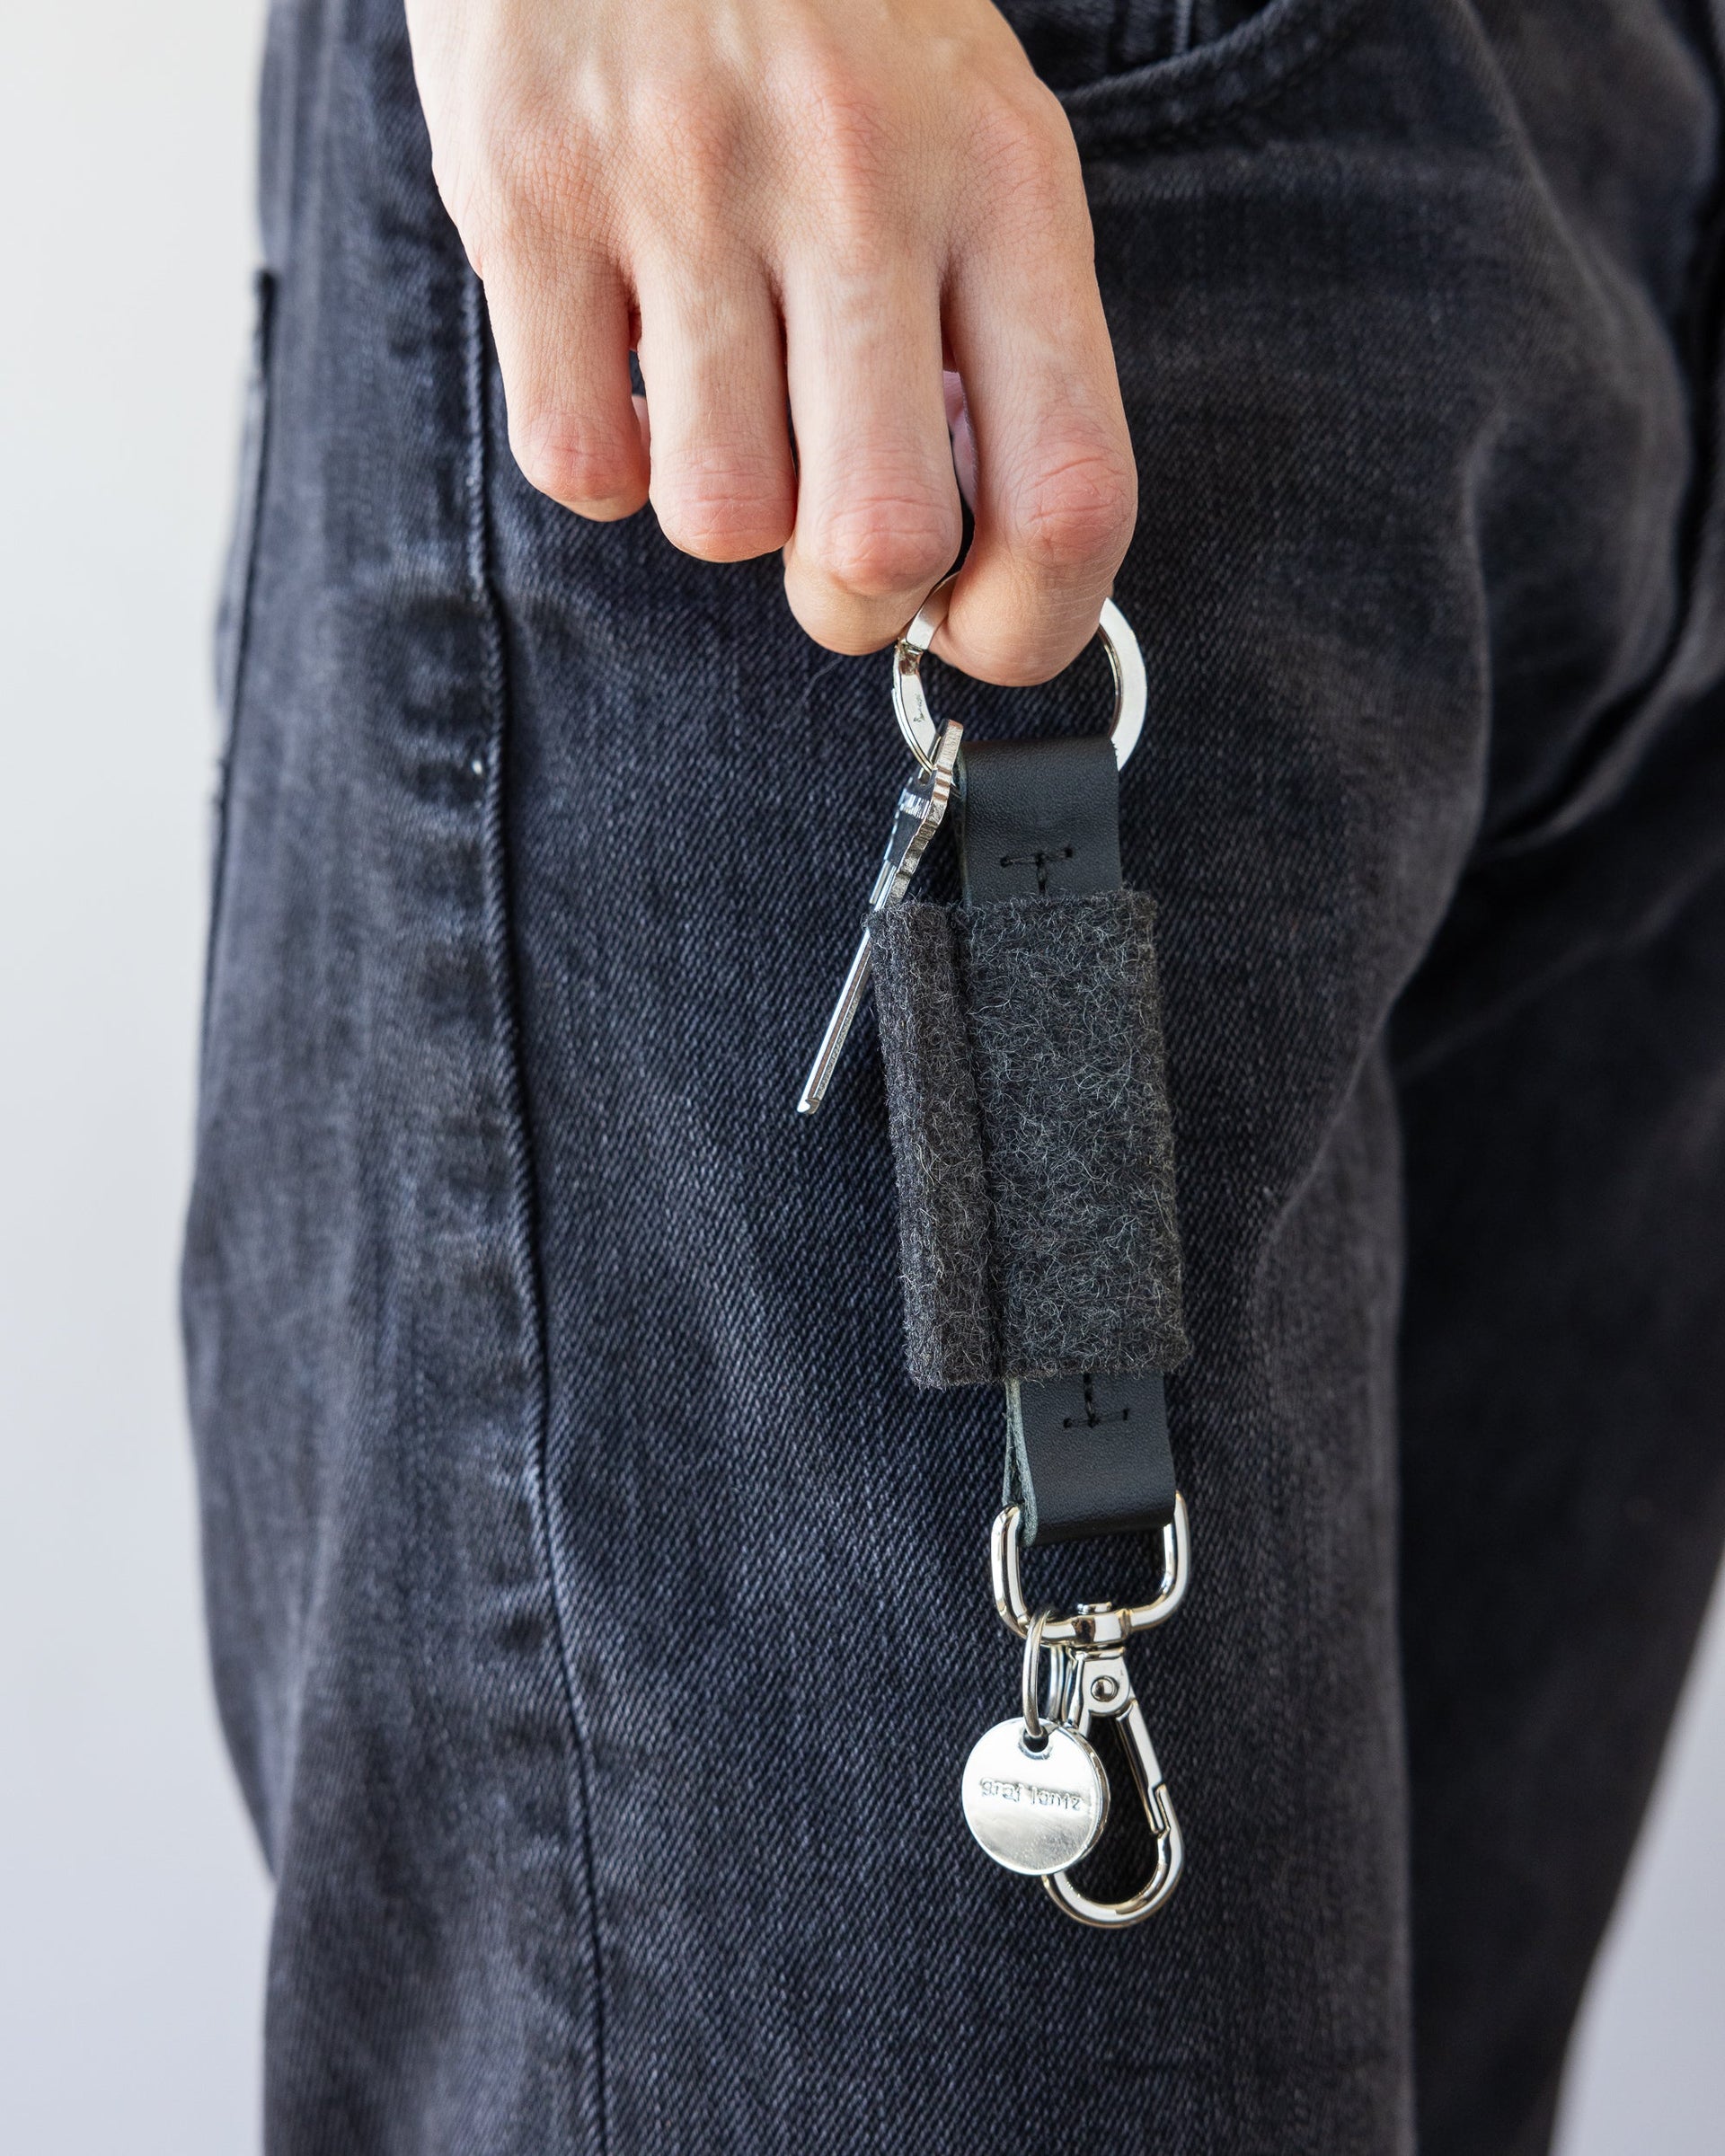 Standing woman holds Charcoal Merino Wool Bar Key Fob on one finger next to her leg wearing black jeans